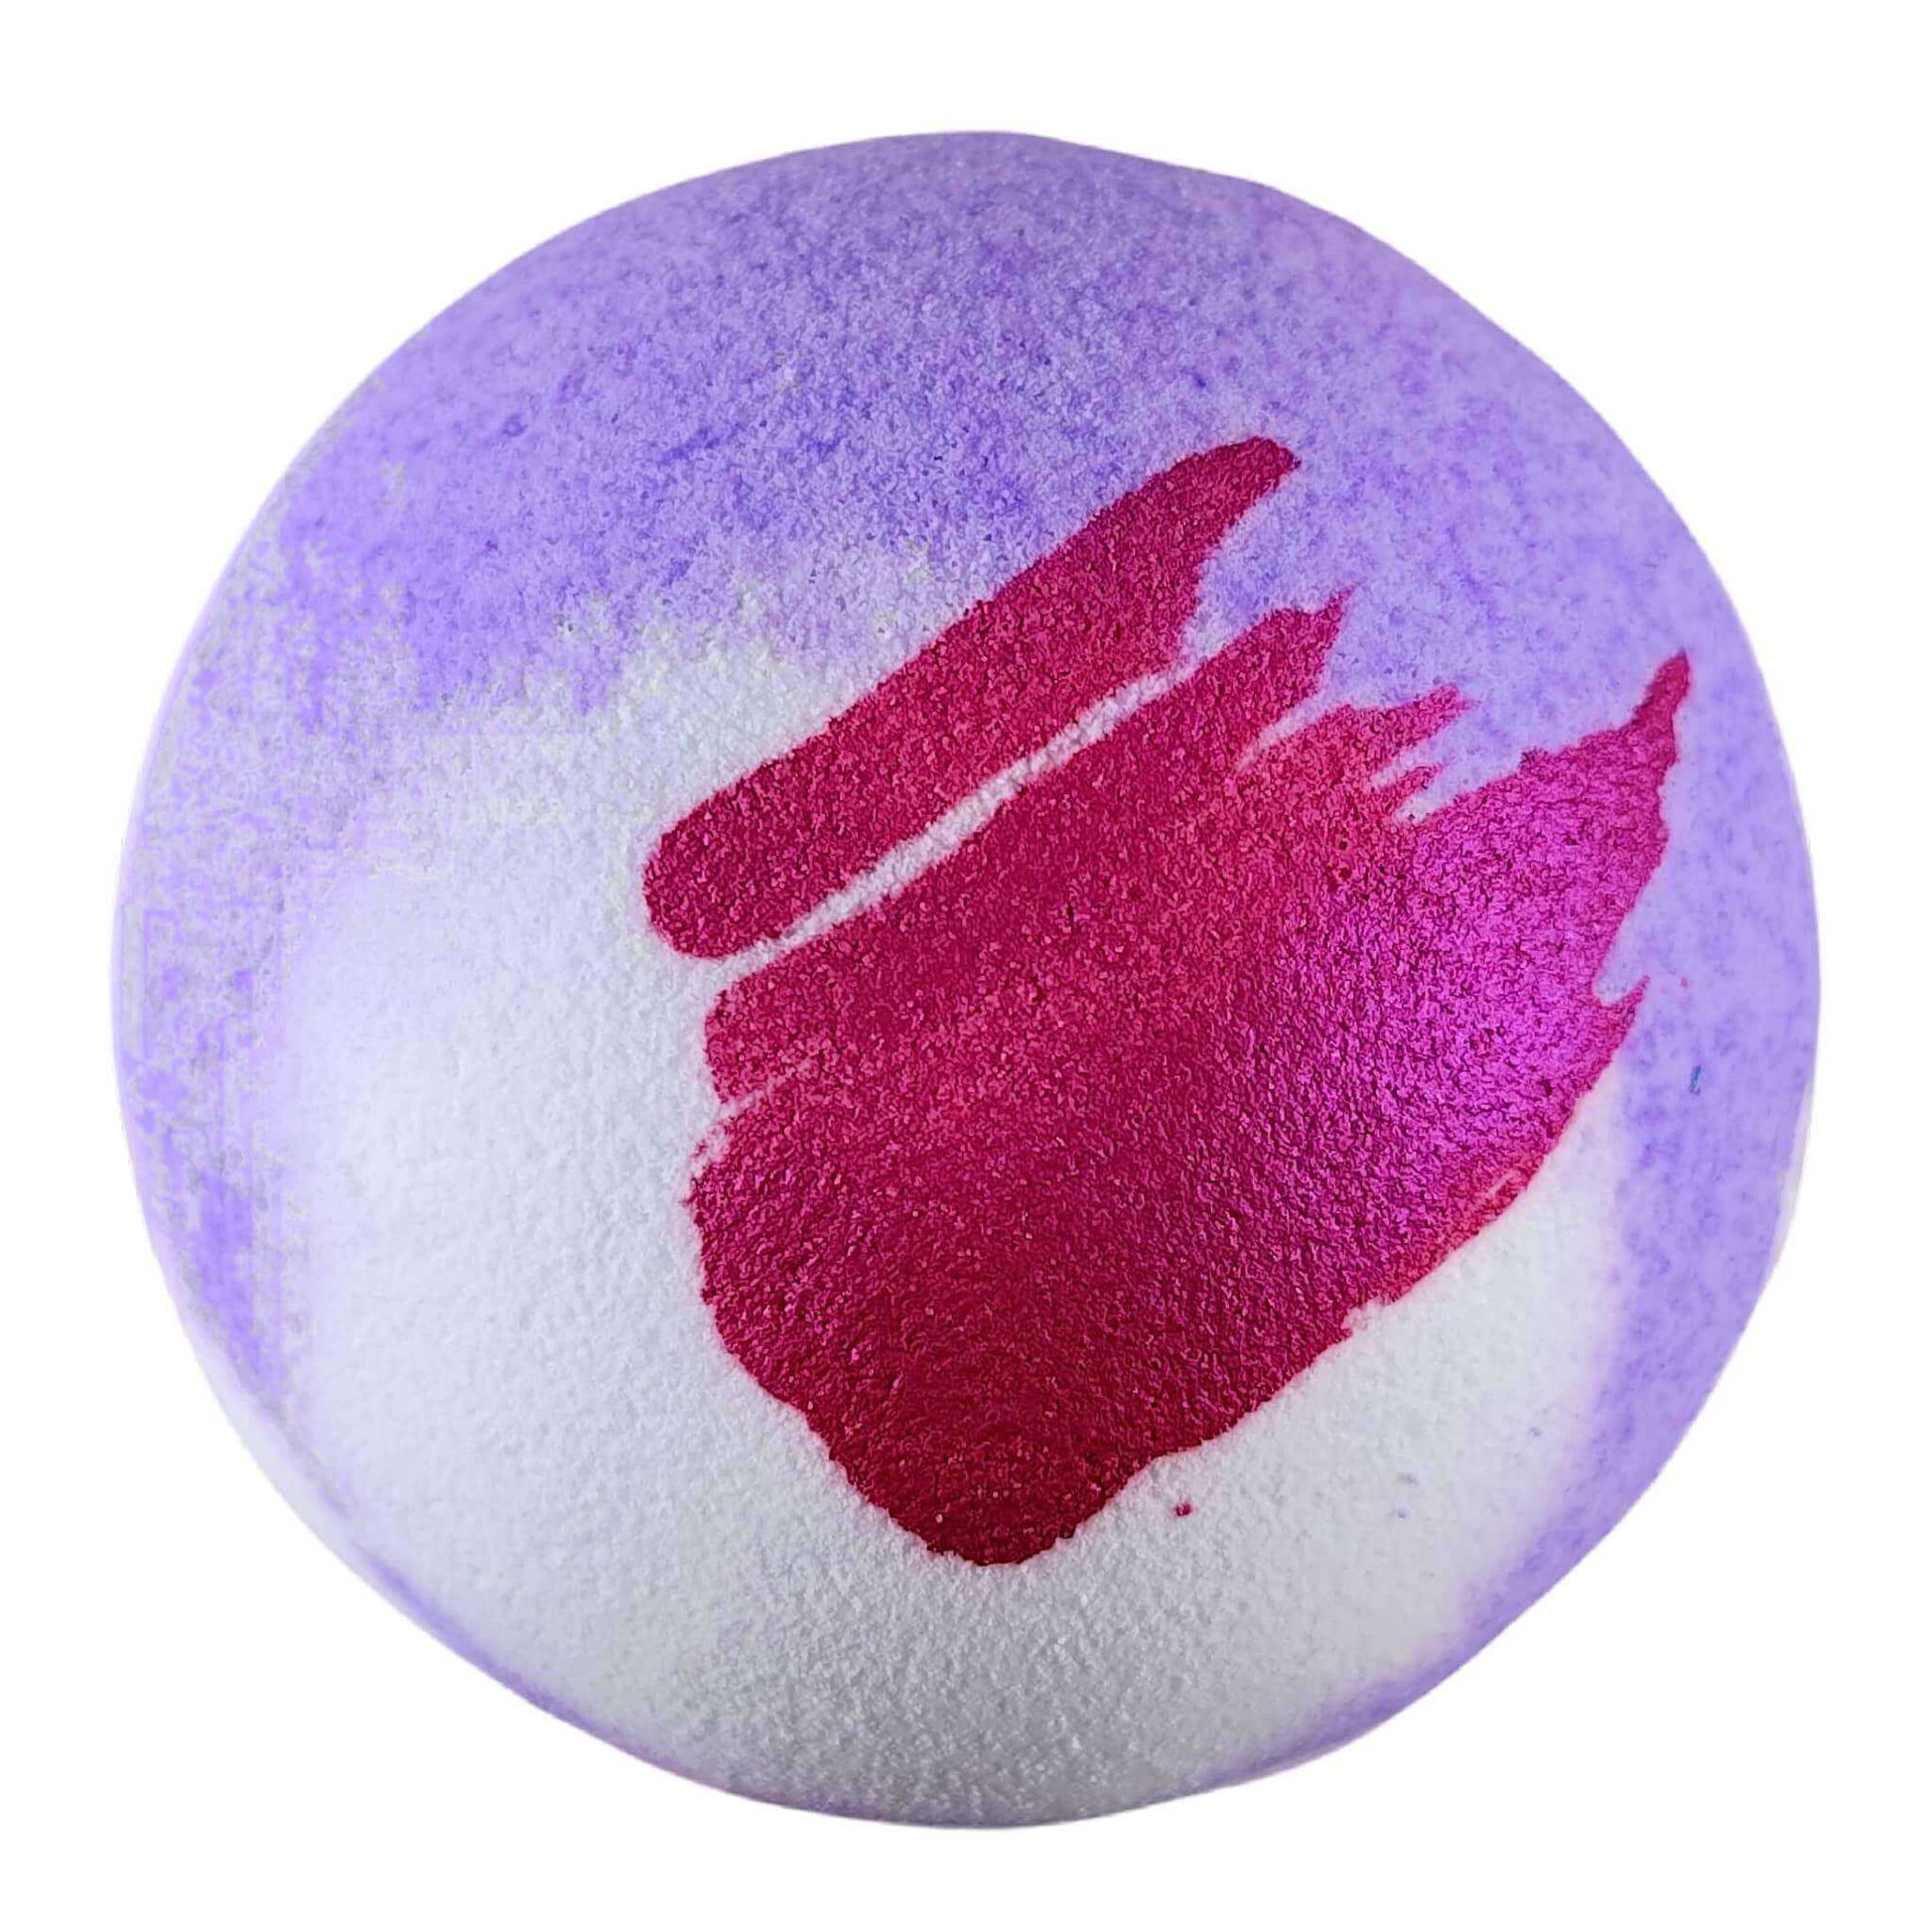 Lavender Luxury Fizzy Bath Bomb: Experience a new level of relaxation and rejuvenation in every bath time.